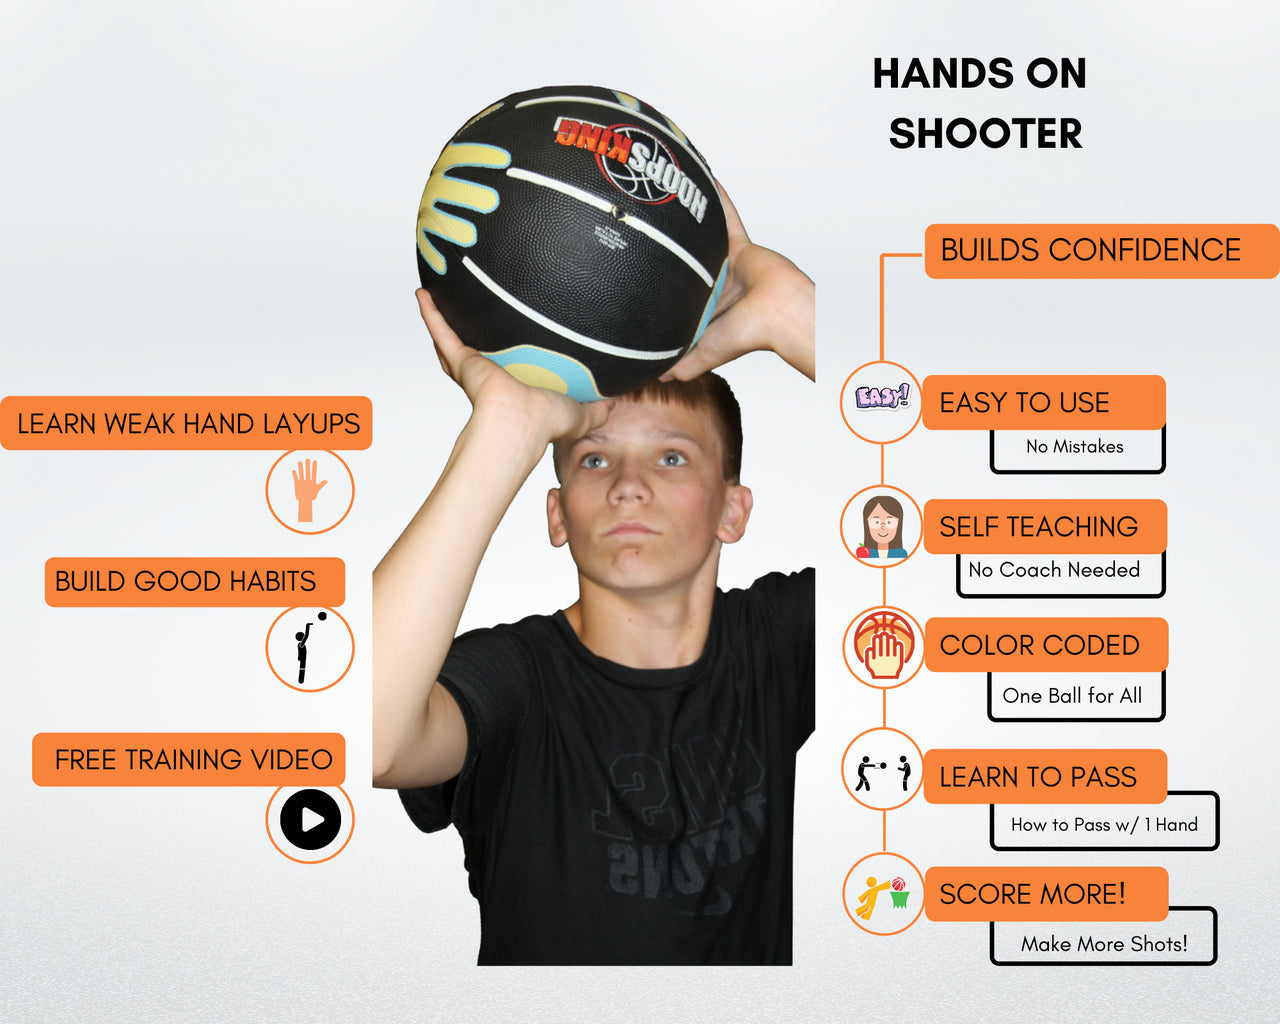 Learn proper basketball hand placement